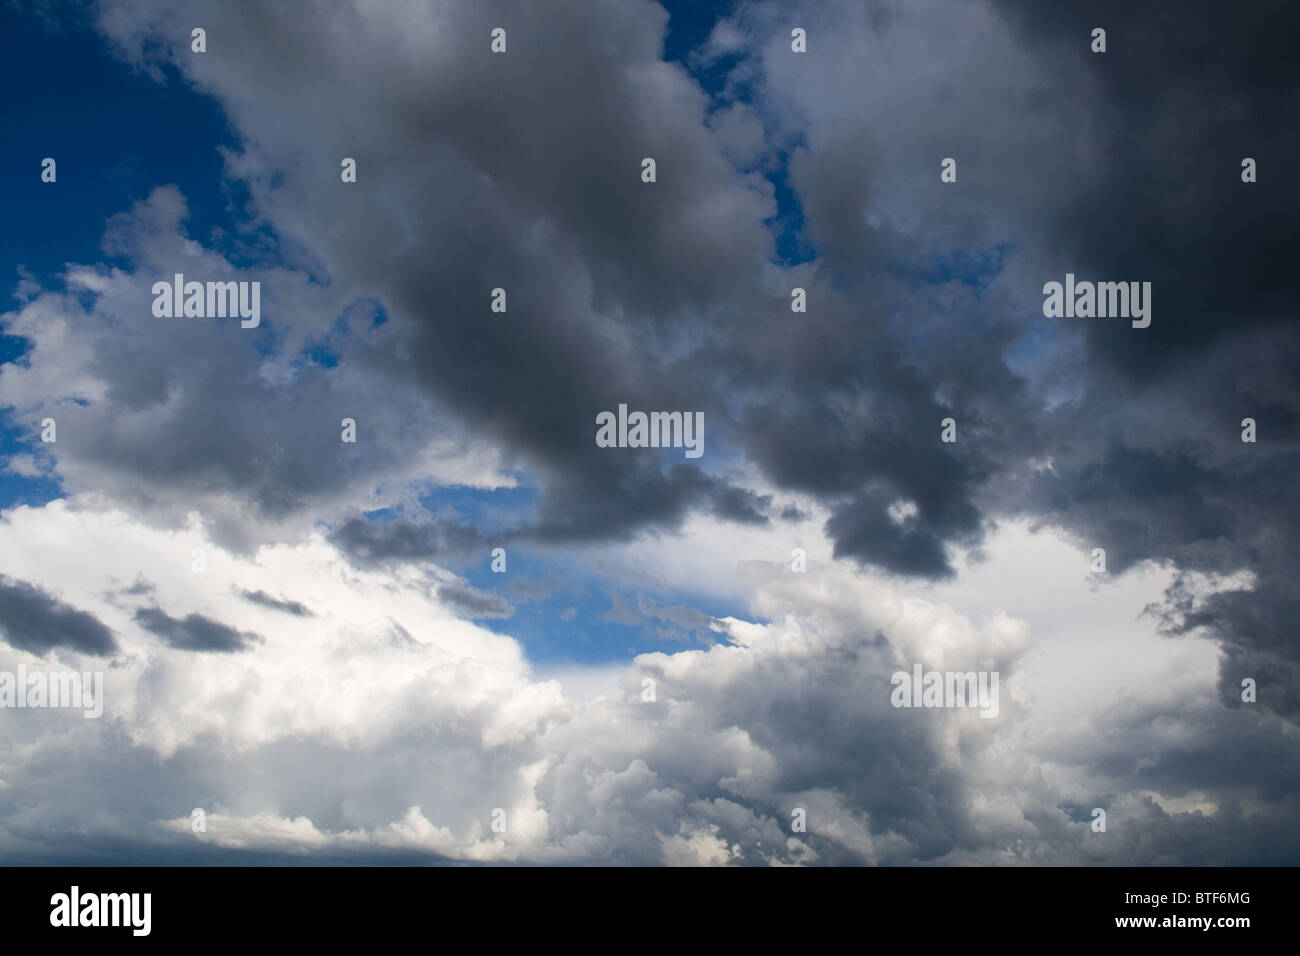 Stormy Weather - Ominous Clouds Stock Photo